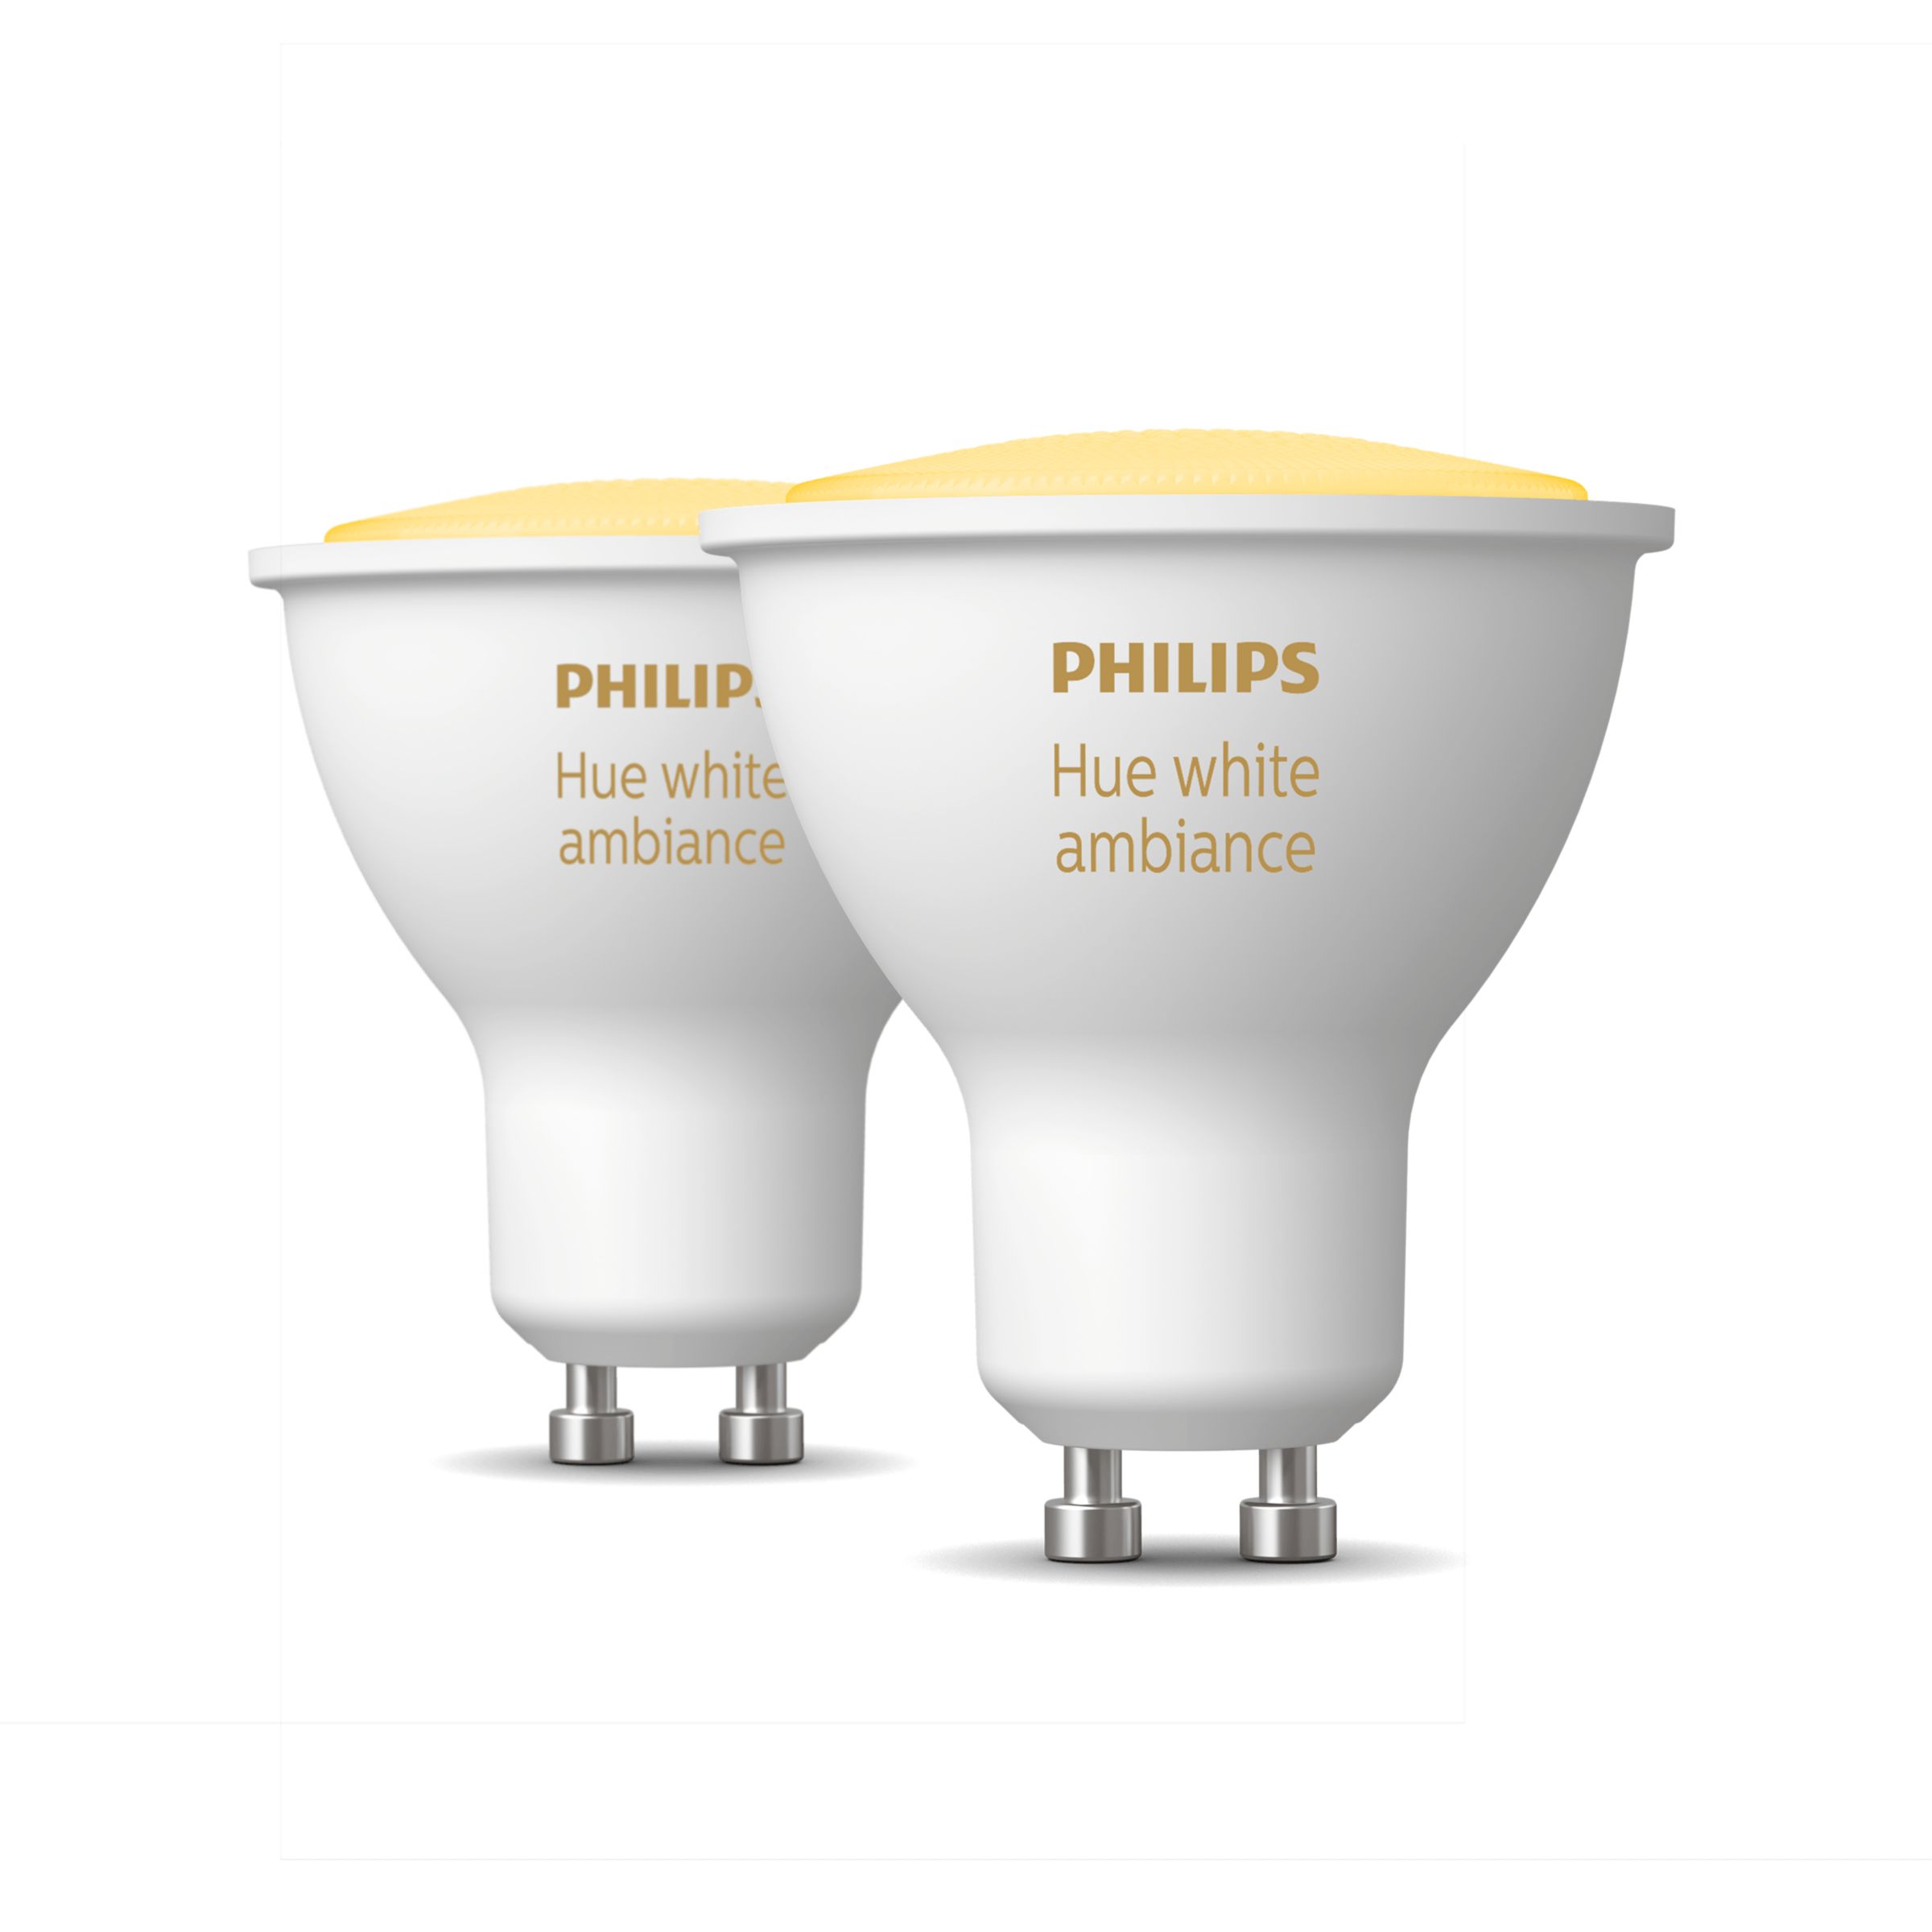 Hue ambiance - slimme spot - (2-pack) | Philips NL